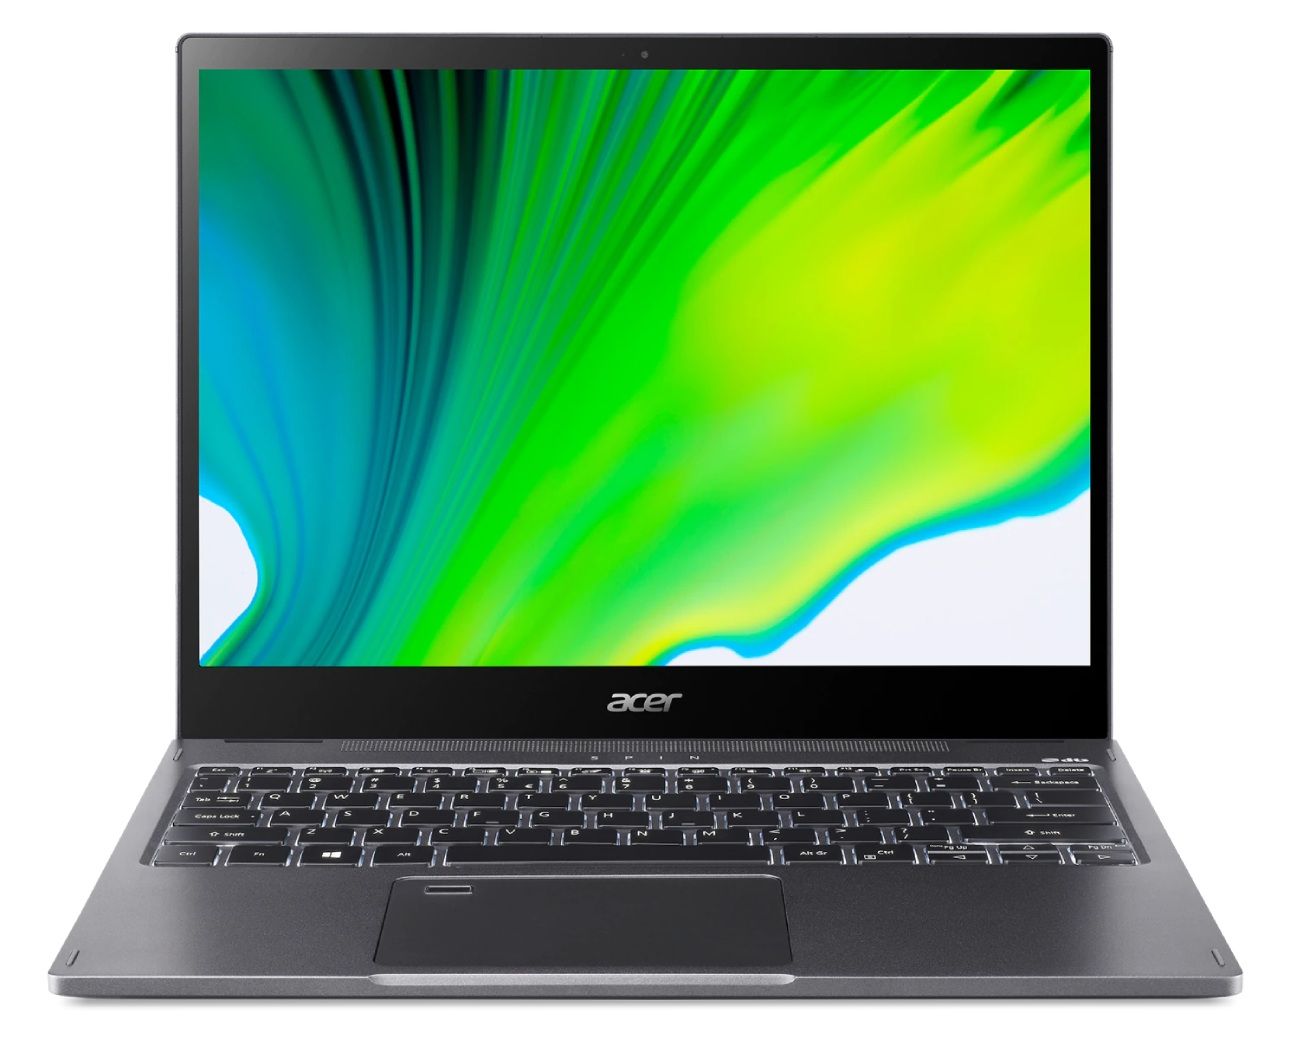 Acer Spin 5 Convertible Laptop With Active Stylus Pen ( 11th Gen Intel Core I7/16GB RAM/512GB SSD/ Iris Xe Graphics/Windows 10 Home/ MS Office)